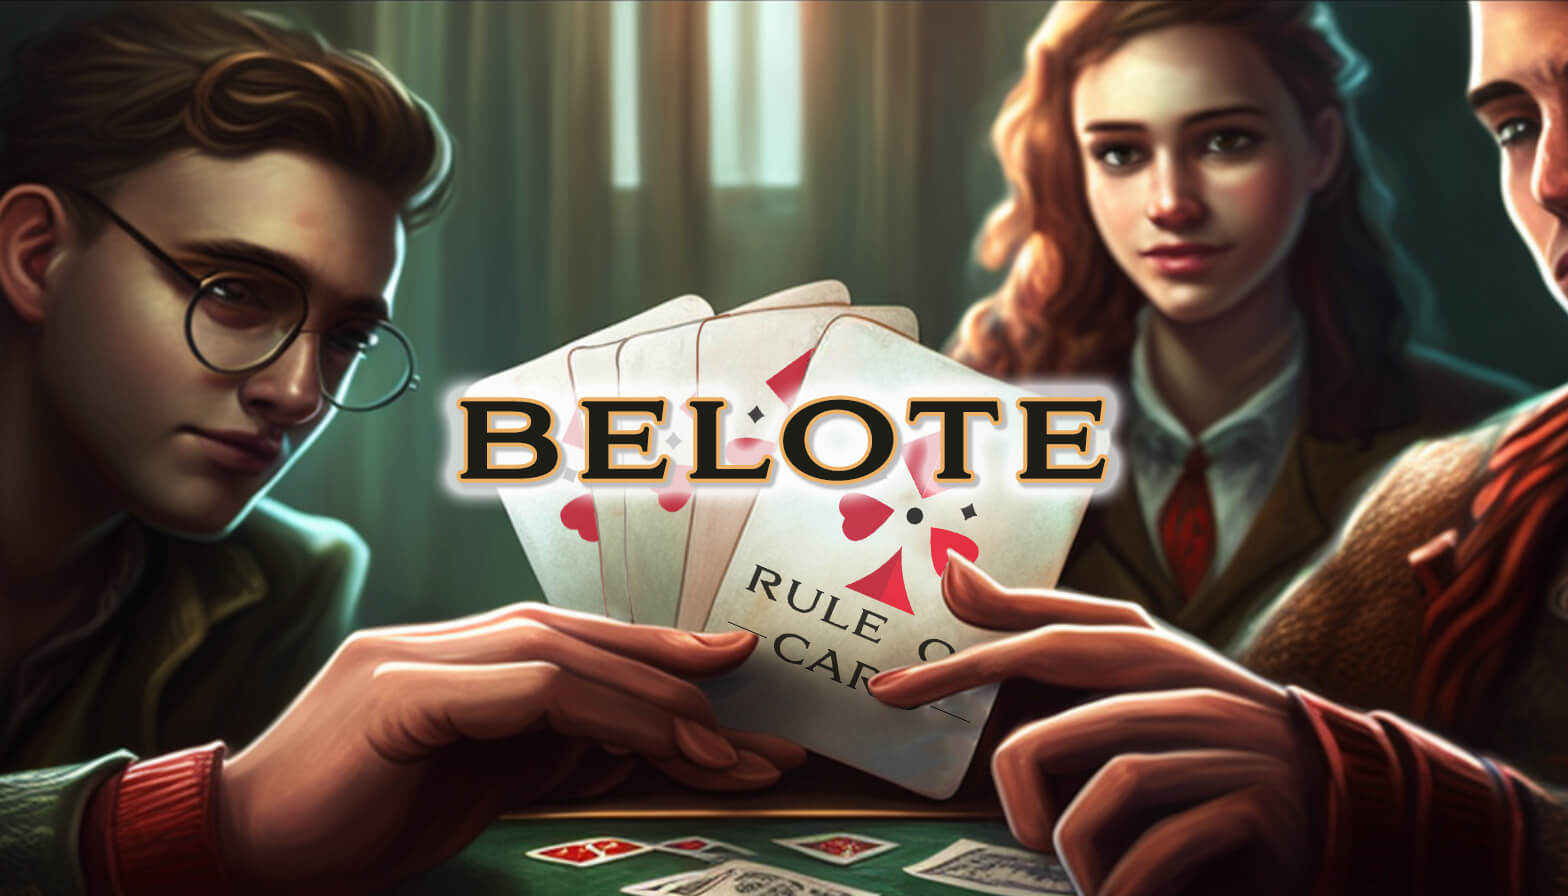 Playing the card game Belote